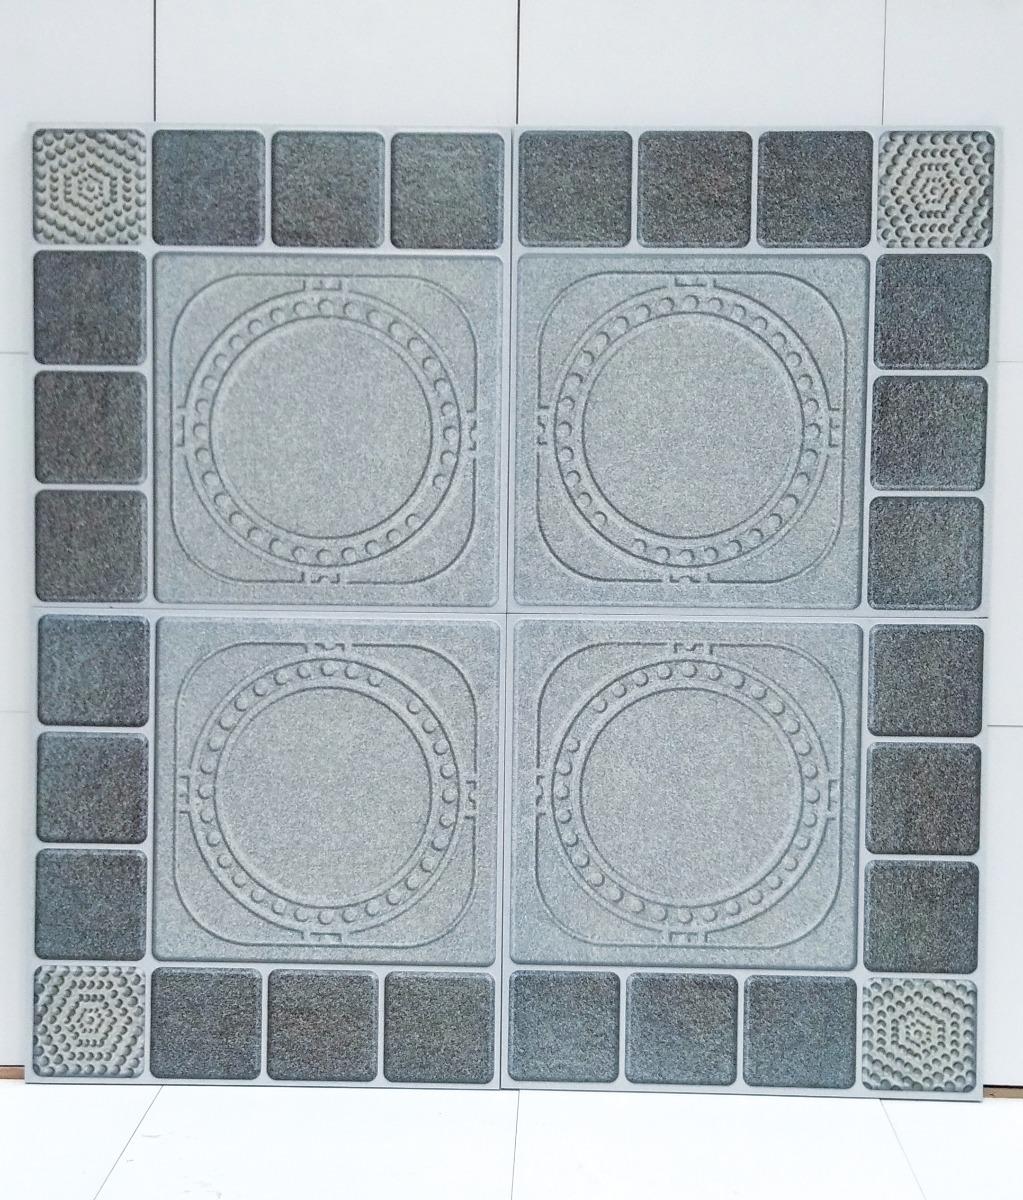 Pathway Tiles for Balcony Tiles, Parking Tiles, Terrace Tiles, Porch Tiles, Pathway Tiles, High Traffic Tiles, Outdoor Area, Outdoor/Terrace, Porch/Parking